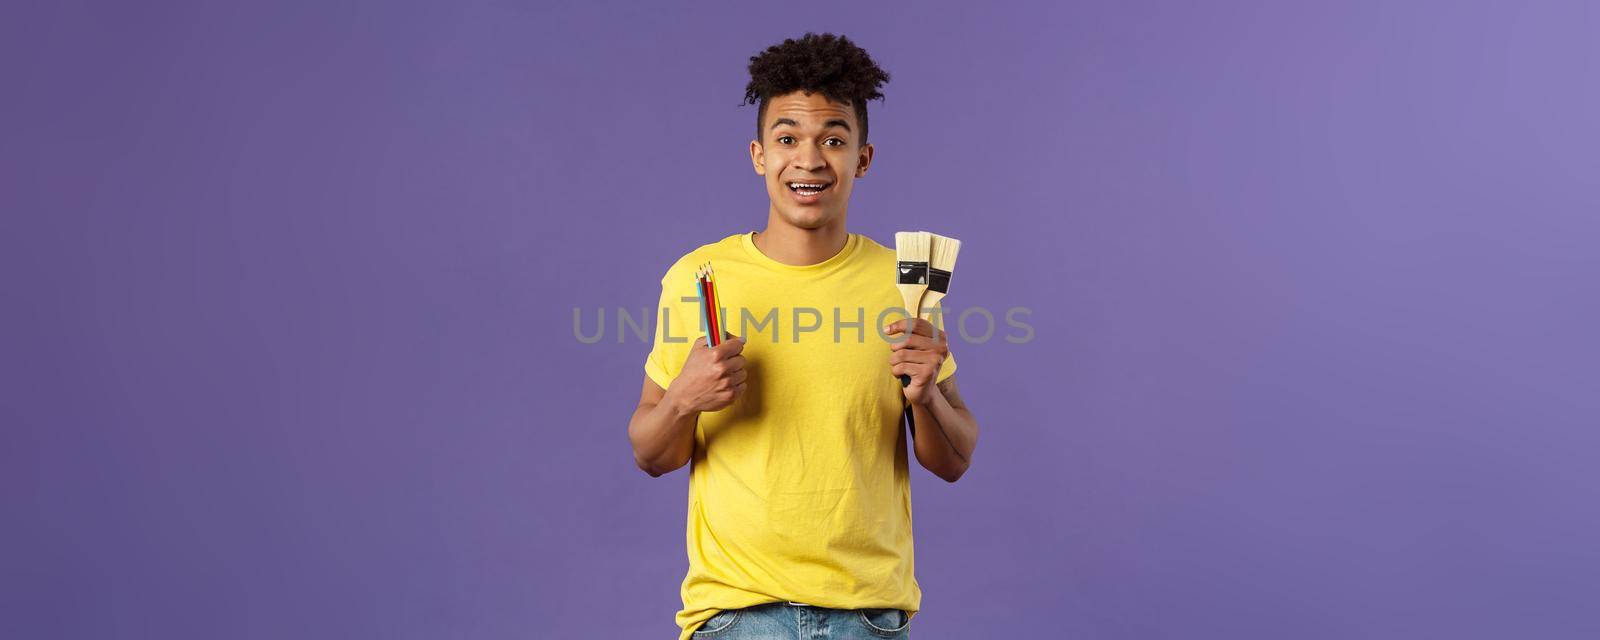 Portrait of upbeat young creative man, artist starting art courses, want to learn how to draw, holding colored pencils and brushes, standing enthusiastic over purple background.